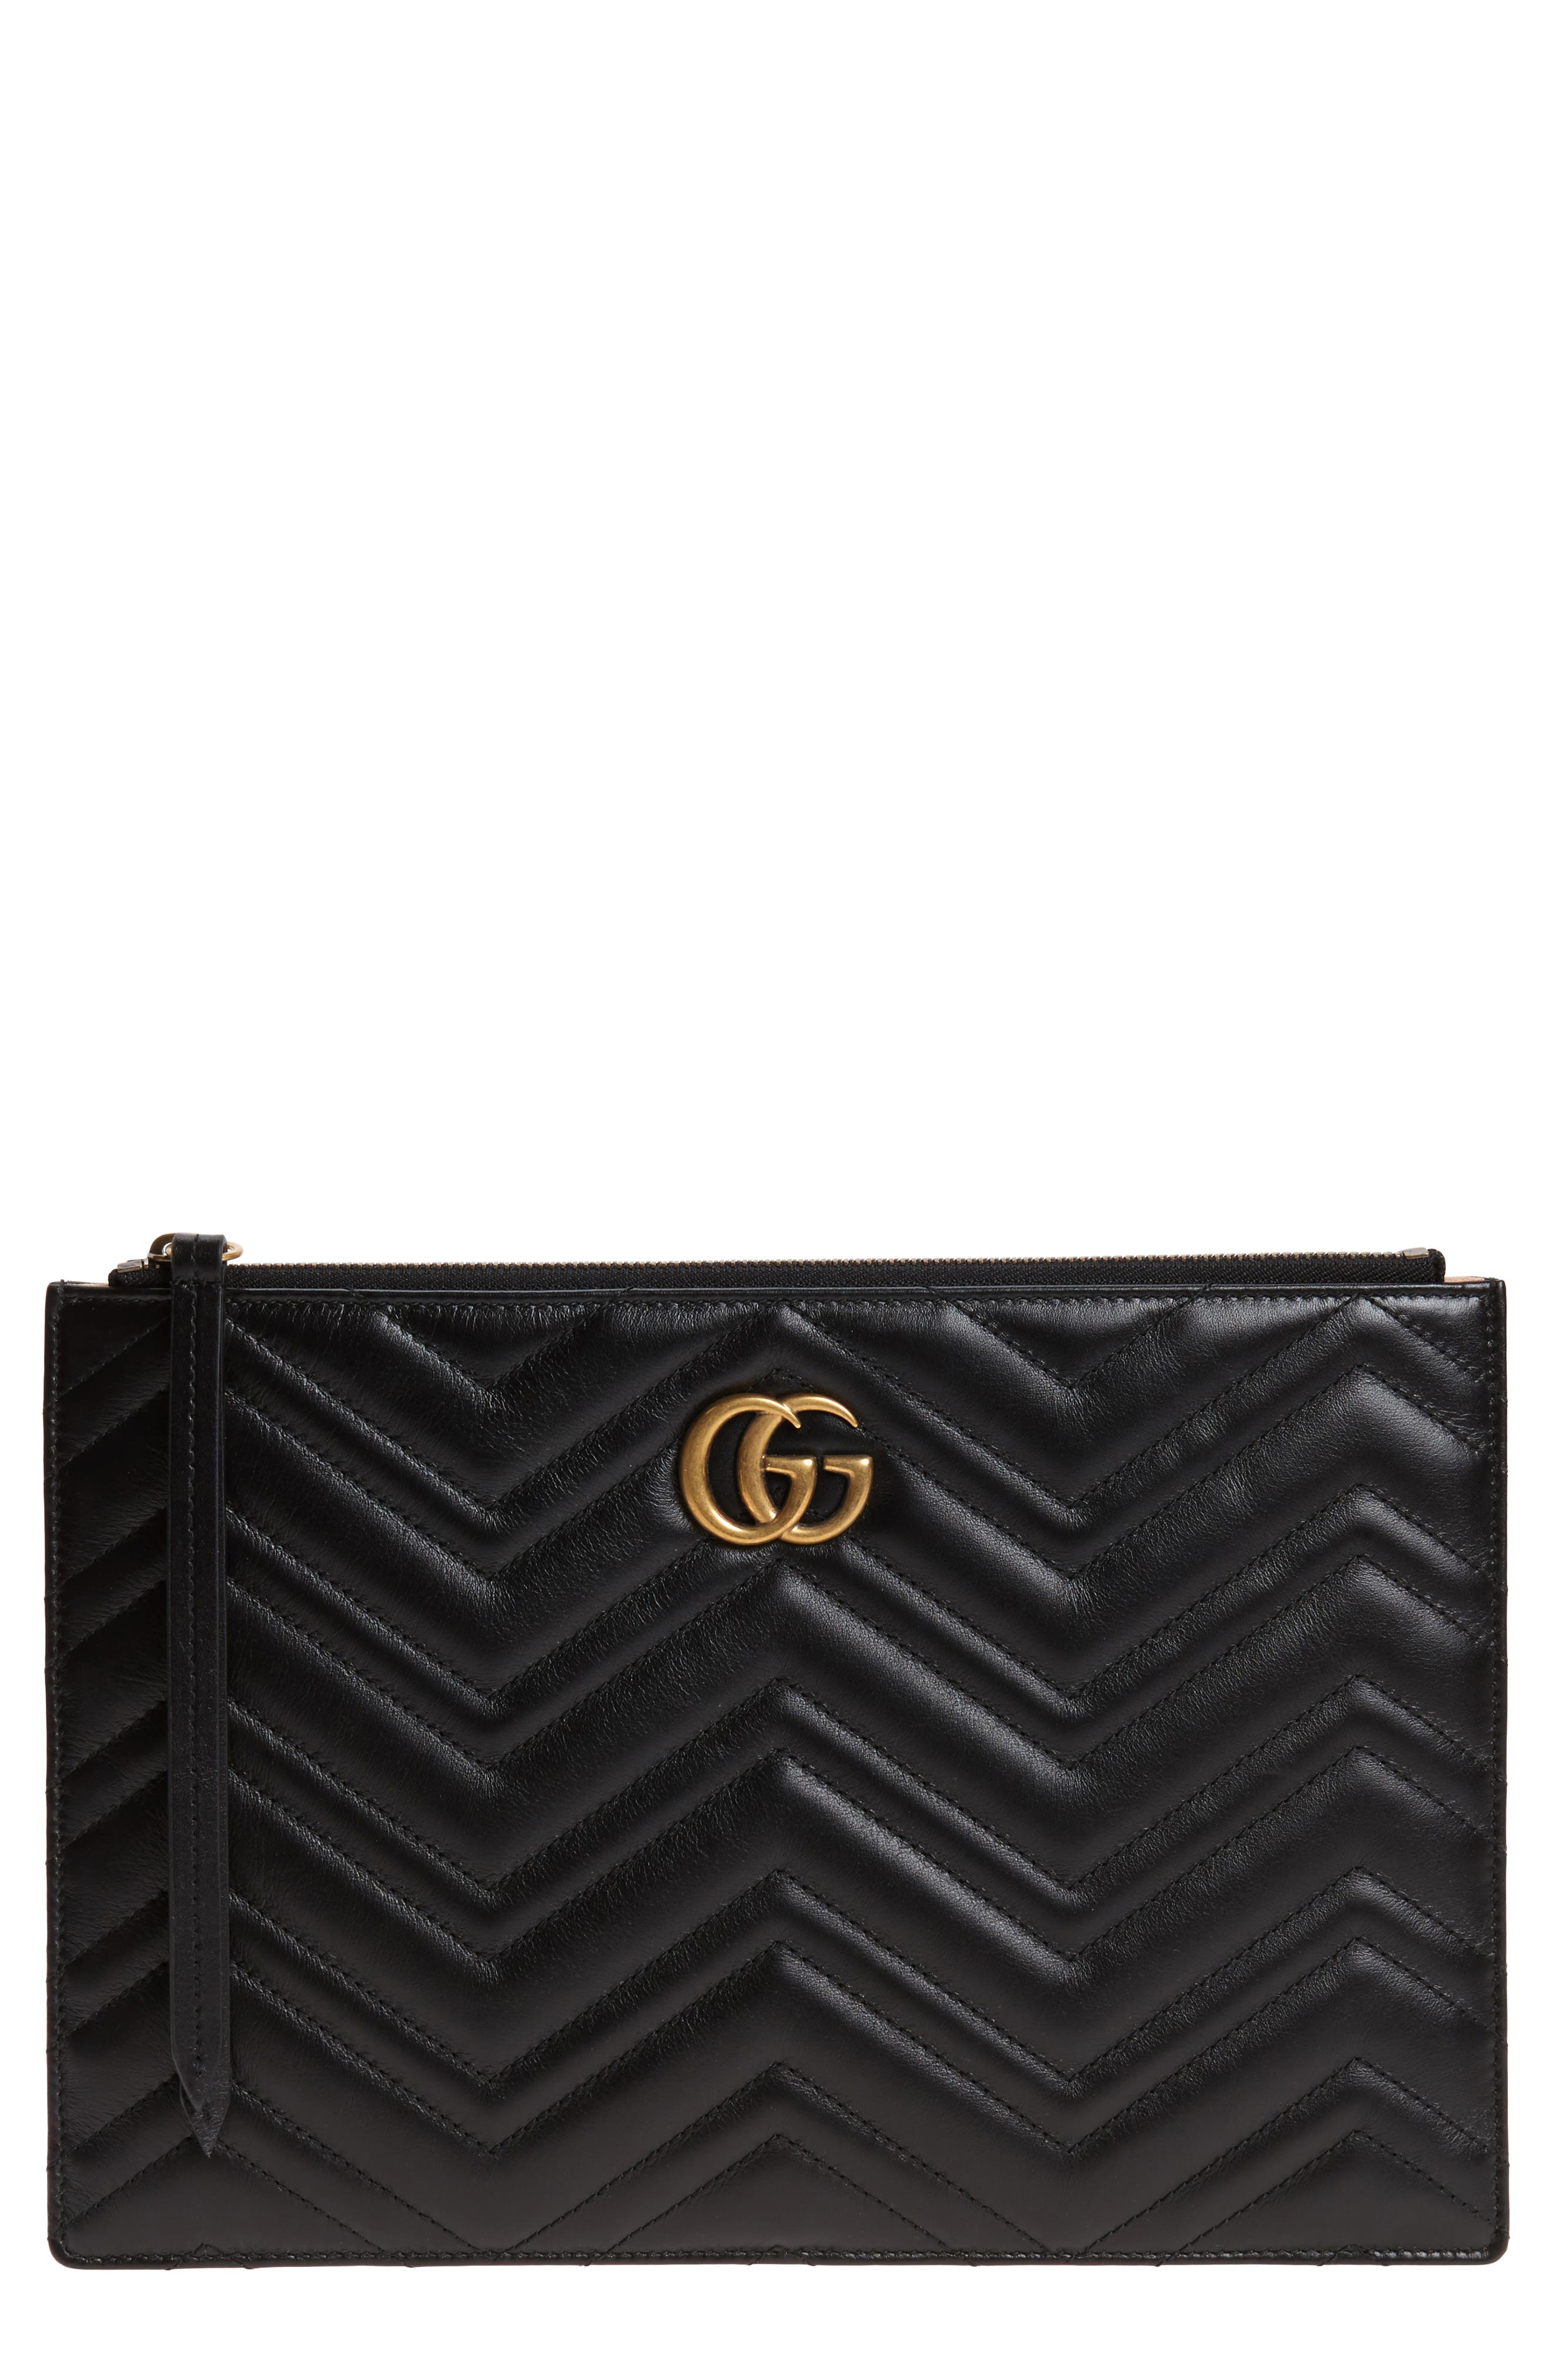 gucci marmont pouch